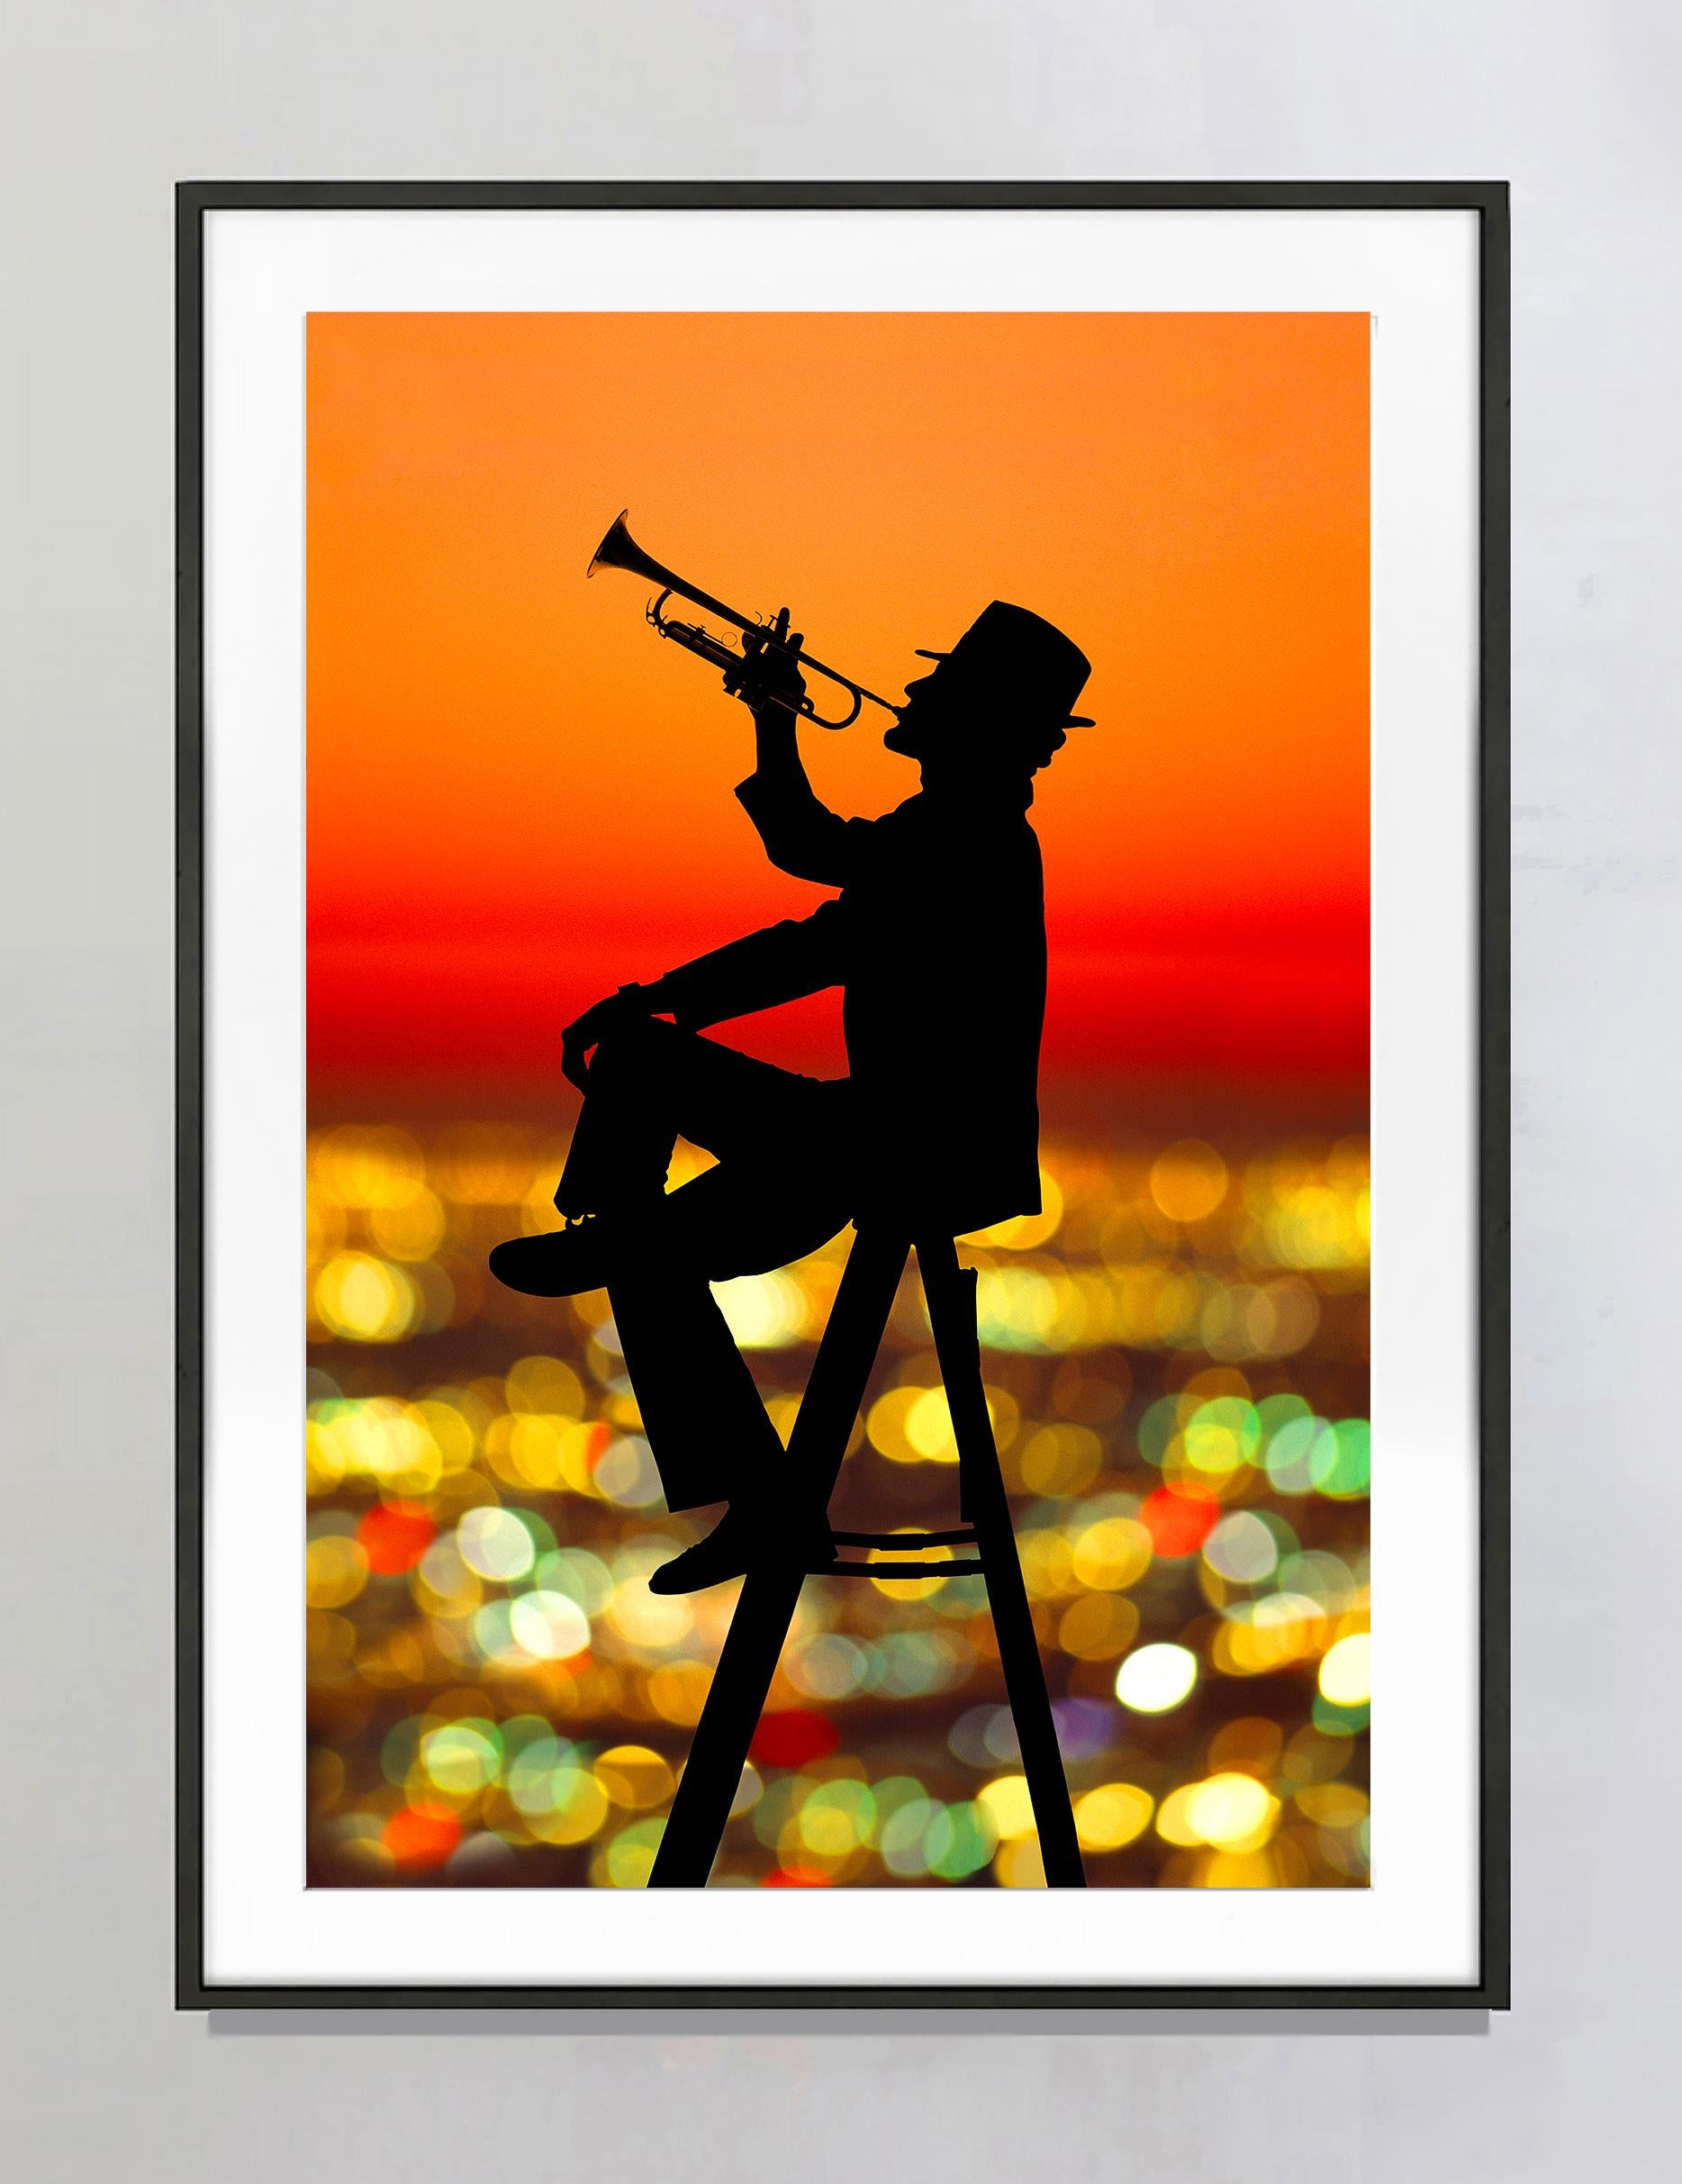 Joyful Jazz Trumpet Player in Silhouette Floating  Orange Sunset Los Angeles - Photograph by Mitchell Funk